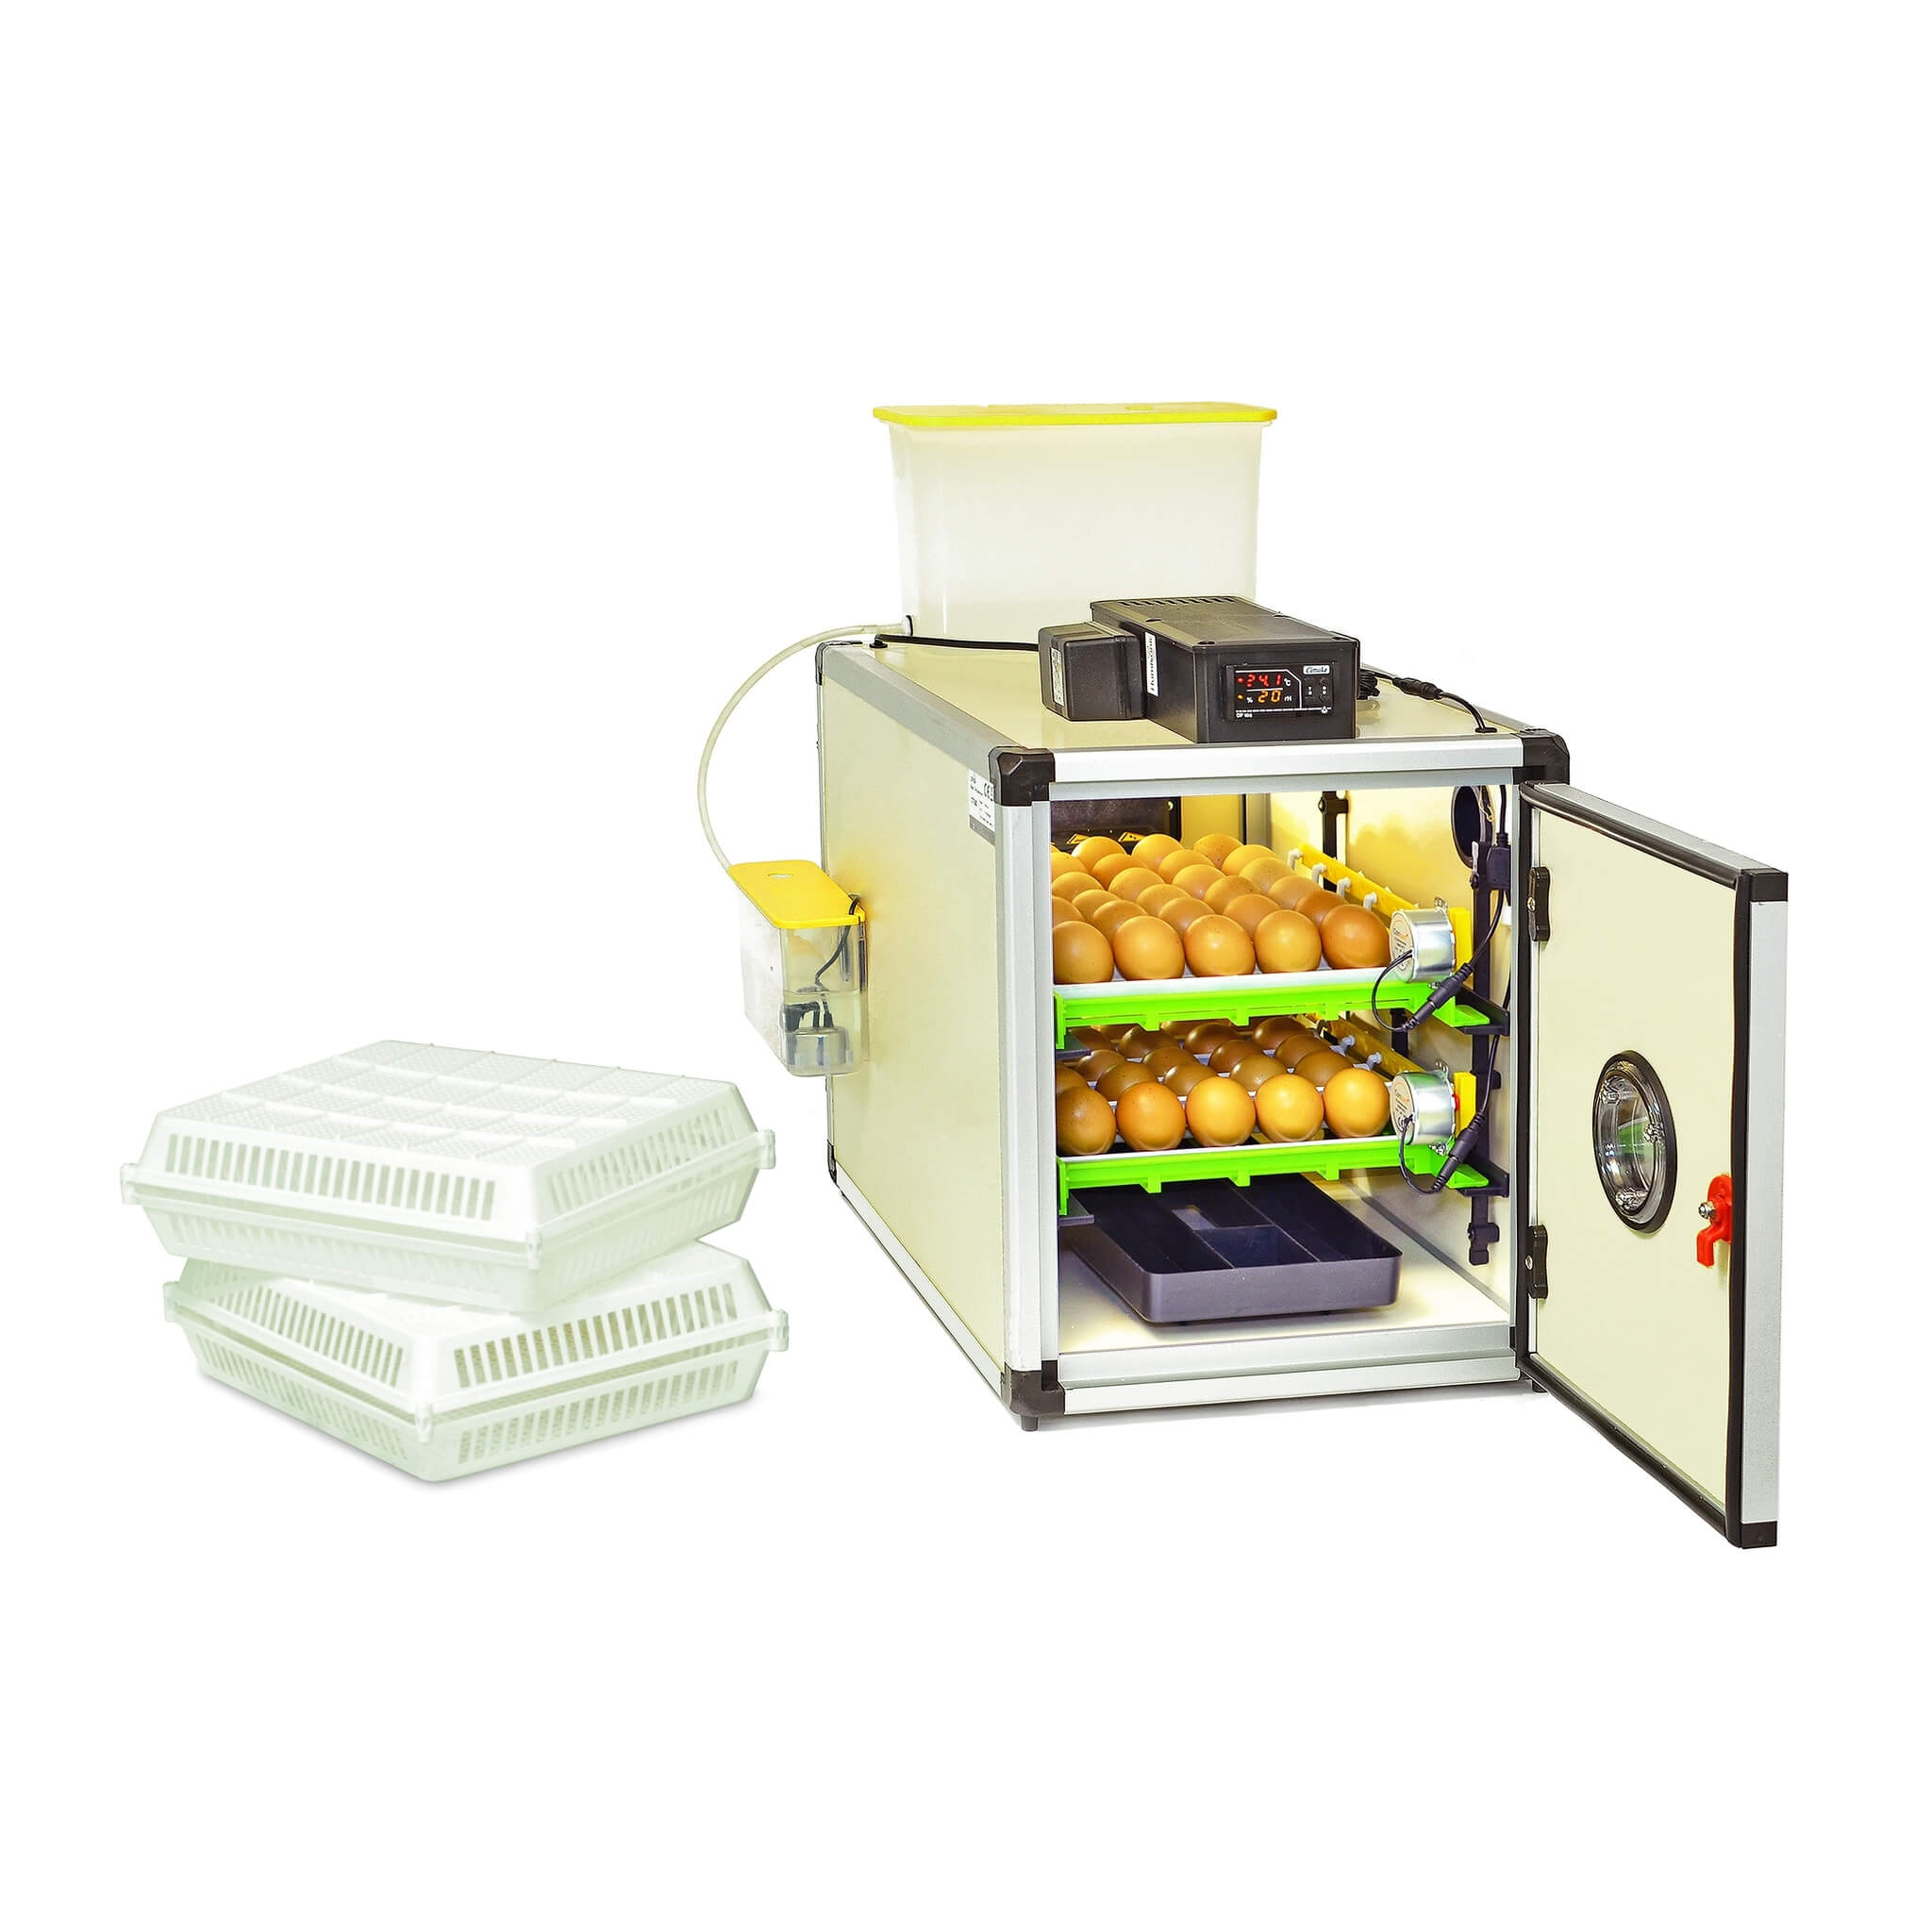 The main photo for Cimuka CT60SH egg incubator by Hatching Time